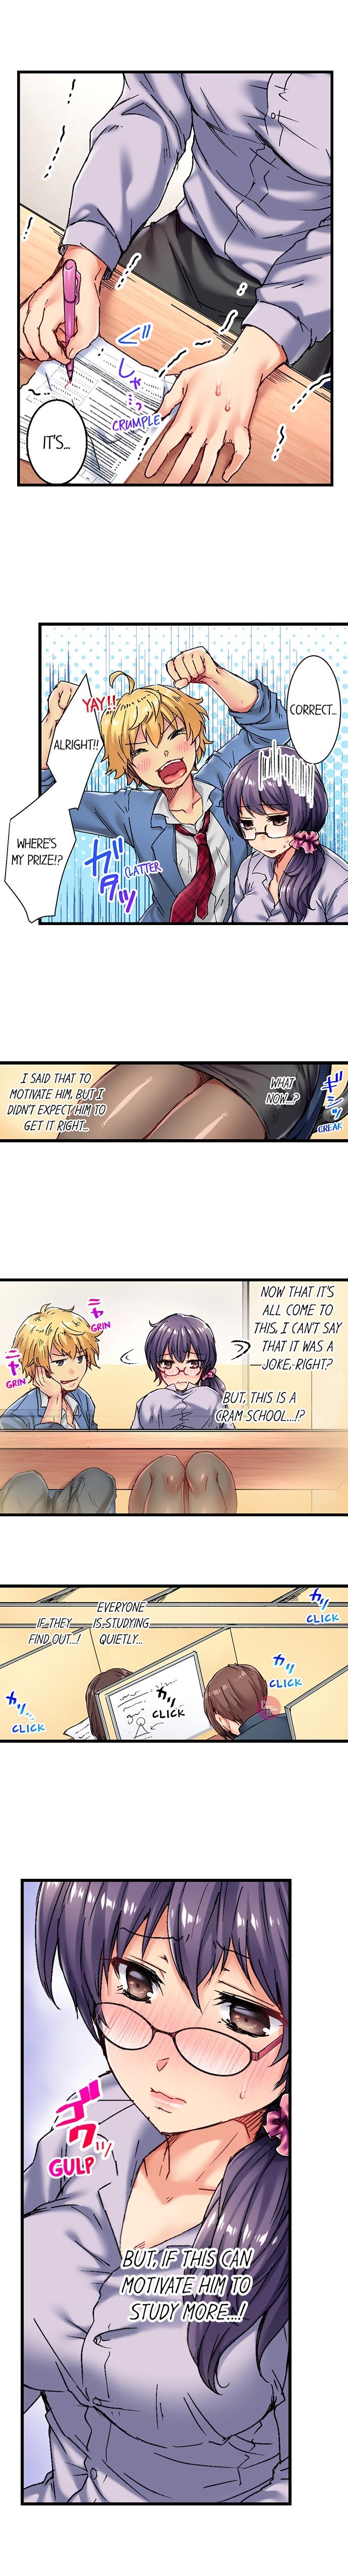 Rewarding My Student With Sex - Chapter 2 Page 3